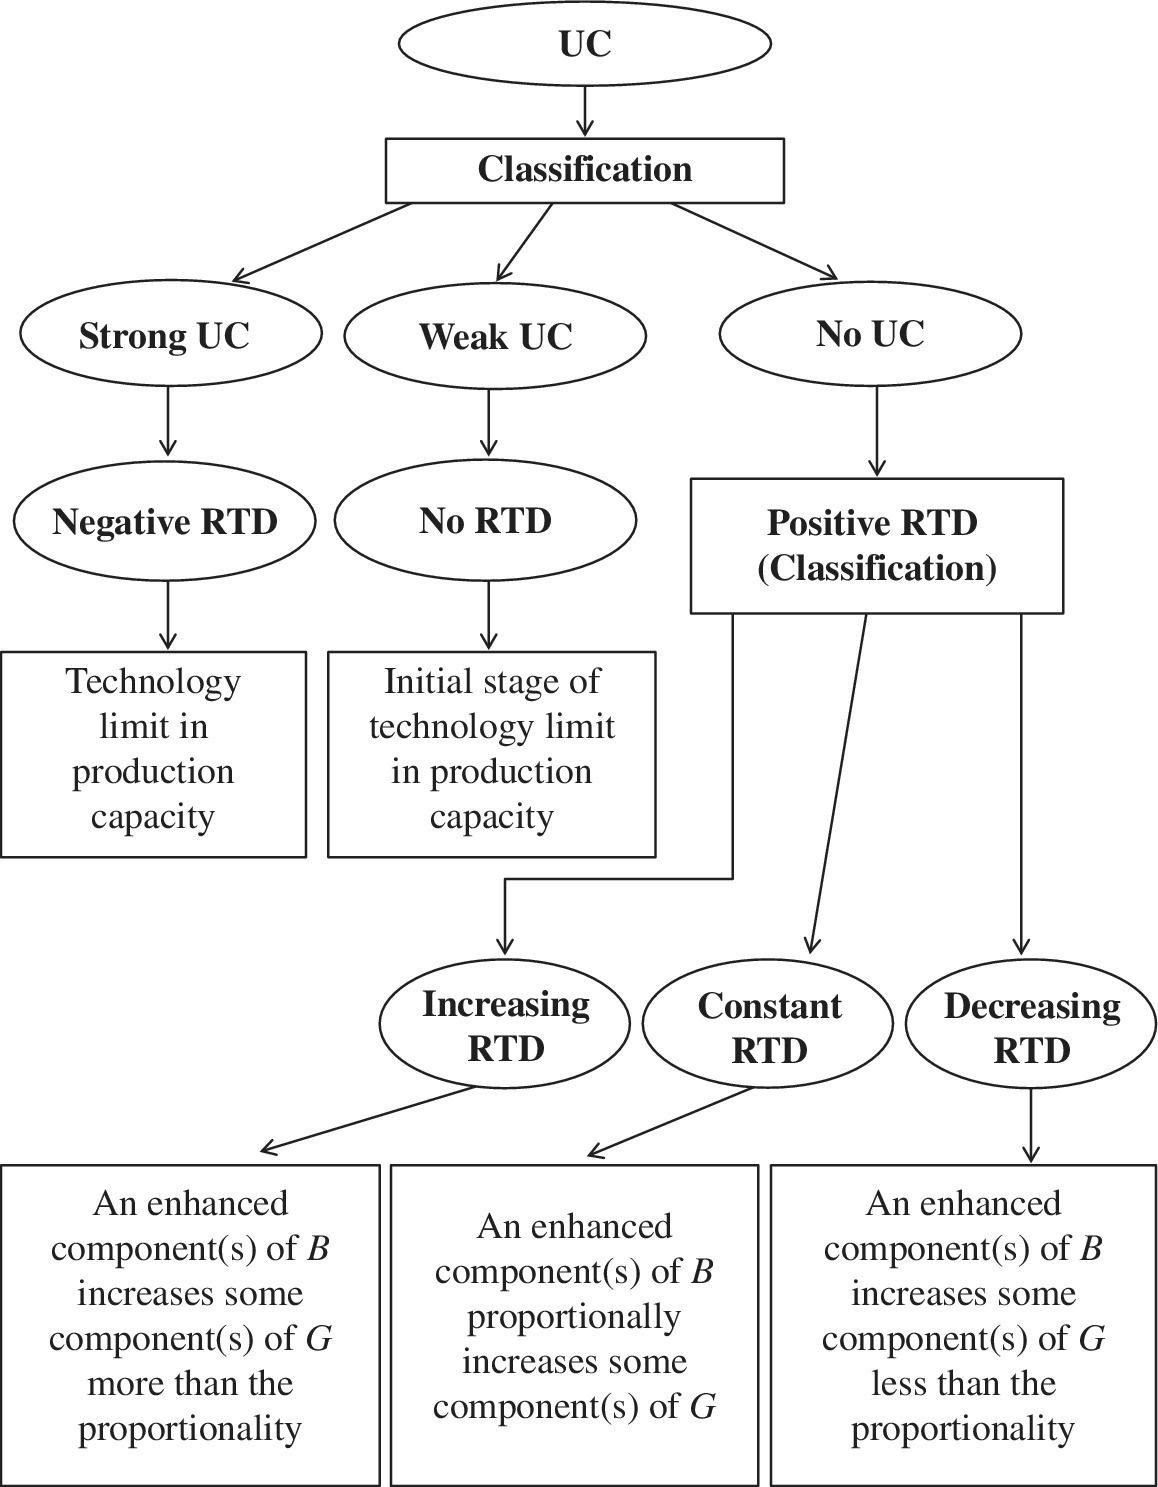 Flow chart displaying boxes and ovals labeled from UC (top) to classification, to strong UC, weak UC, and no UC, and to negative RTD, no RTD, and positive RTD (branching to increasing, constant, and decreasing RTD).